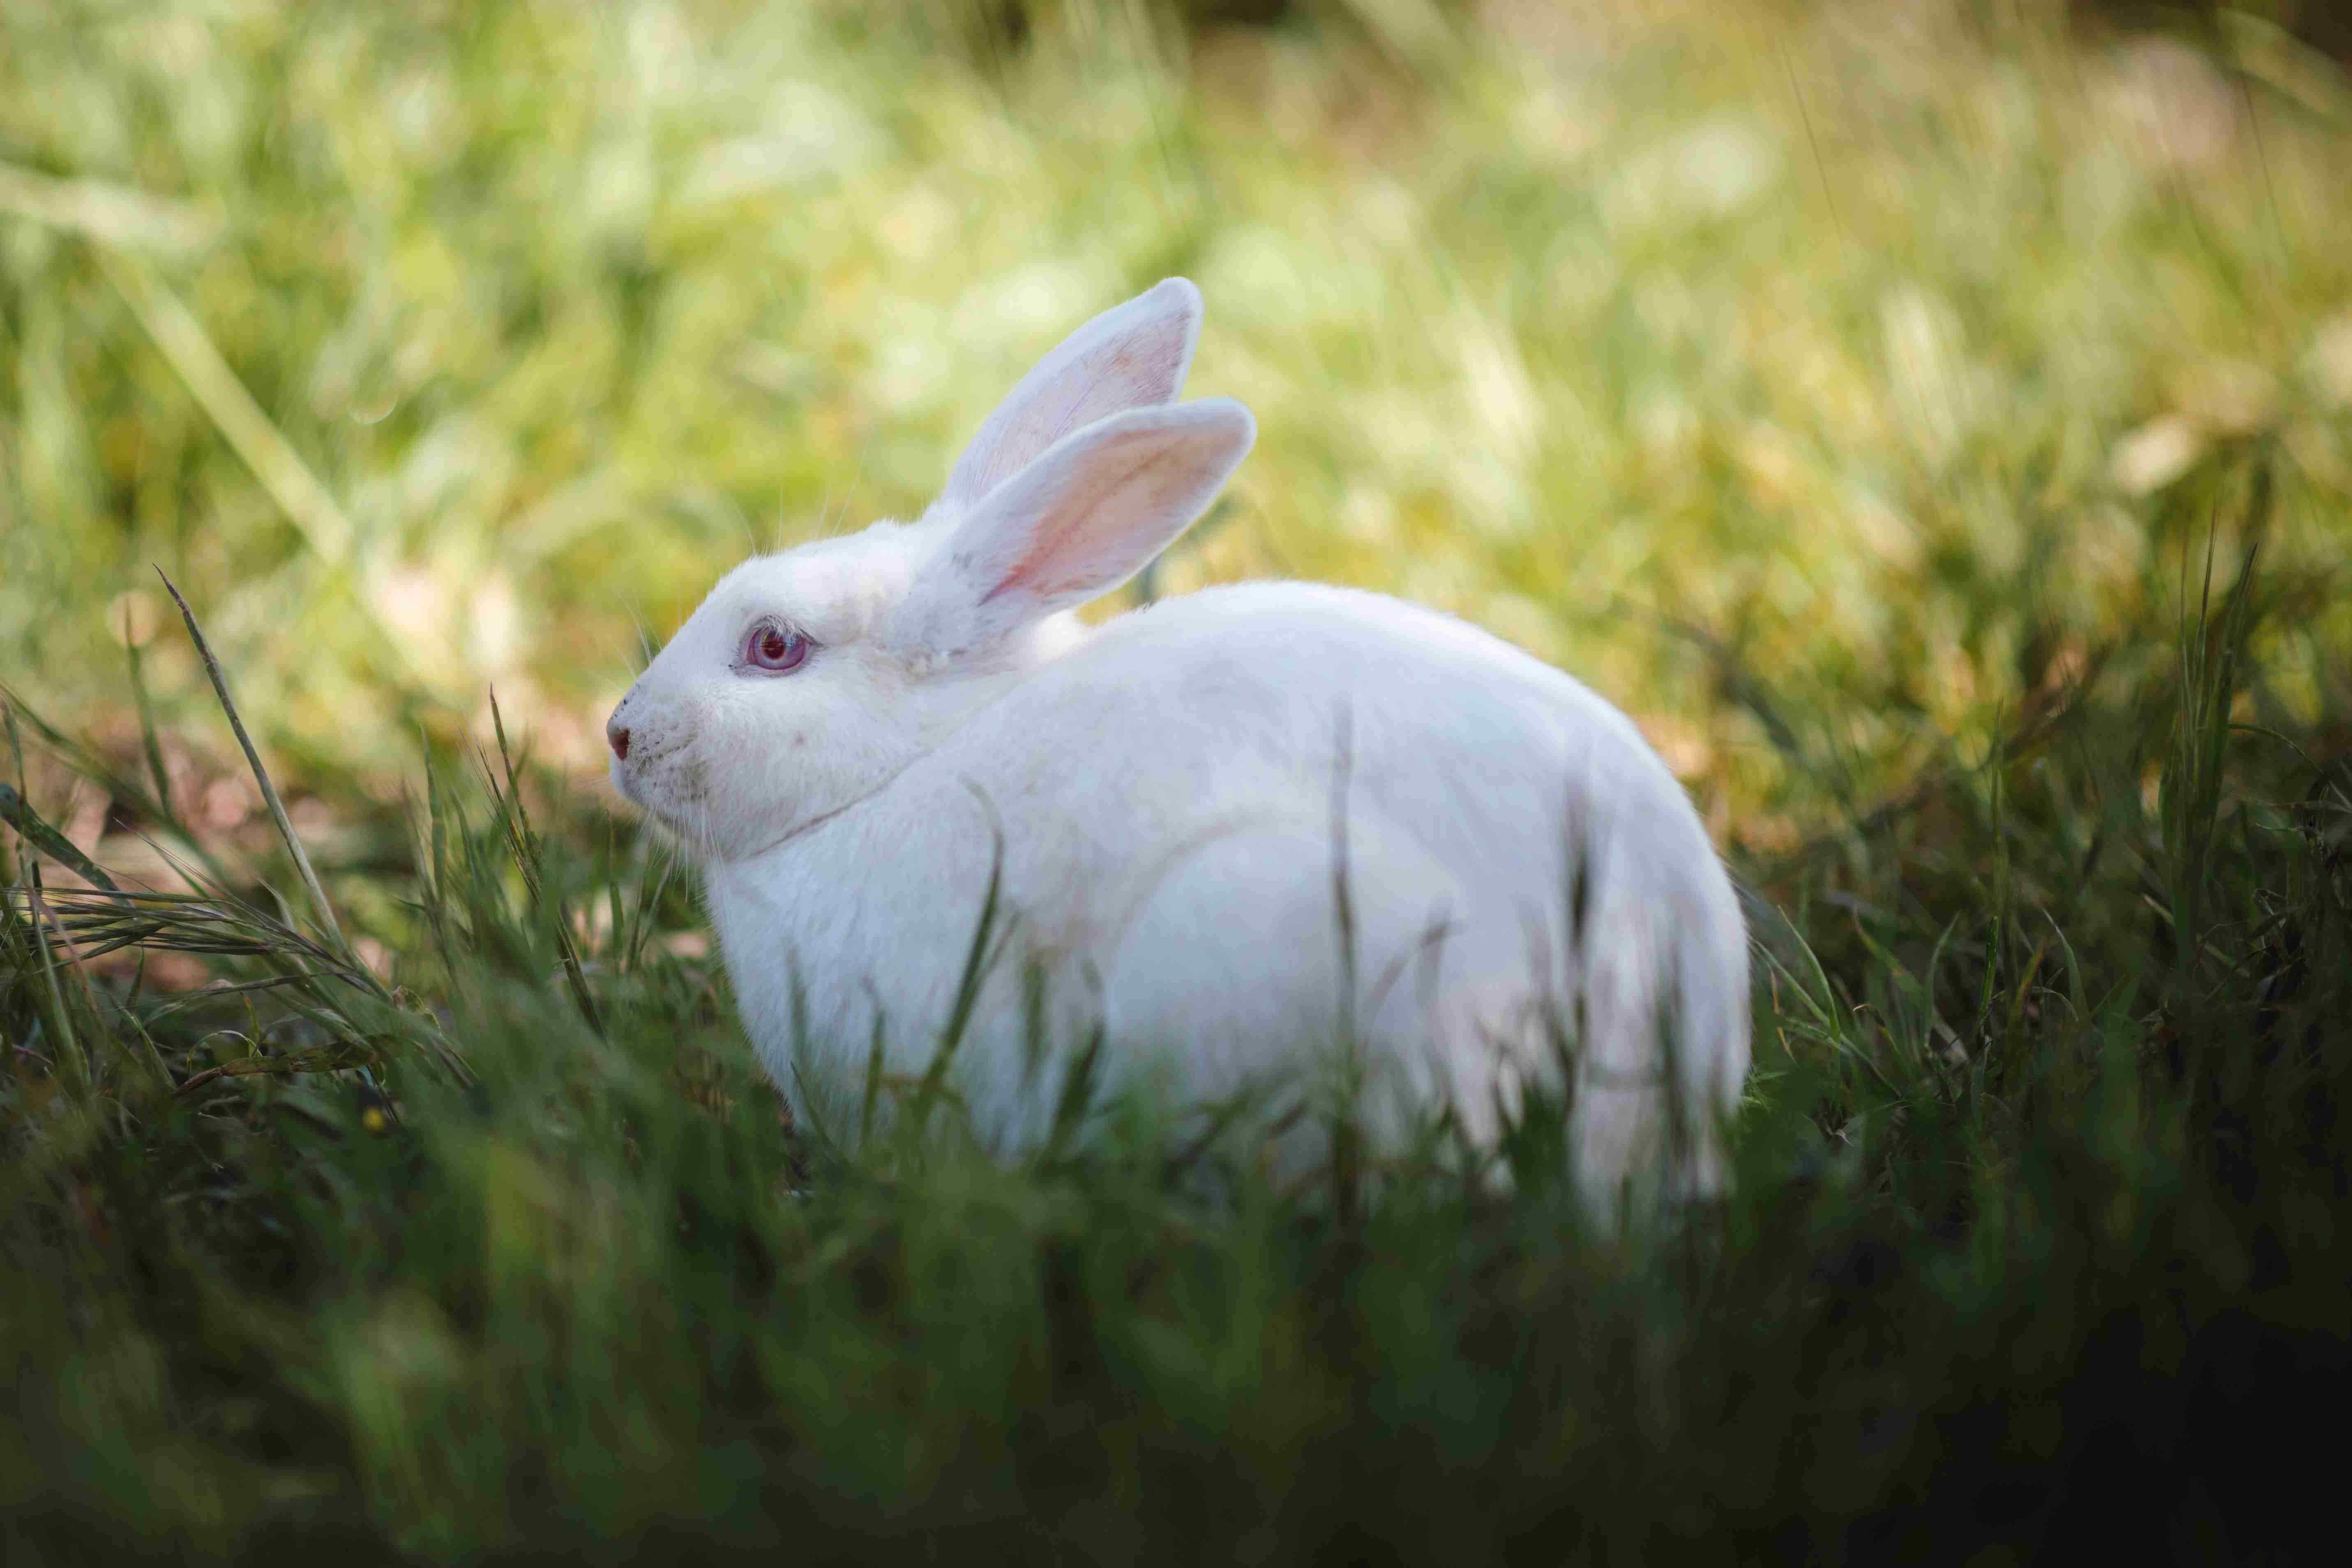 Expert Tips for Safely Handling Scared or Aggressive Rabbits